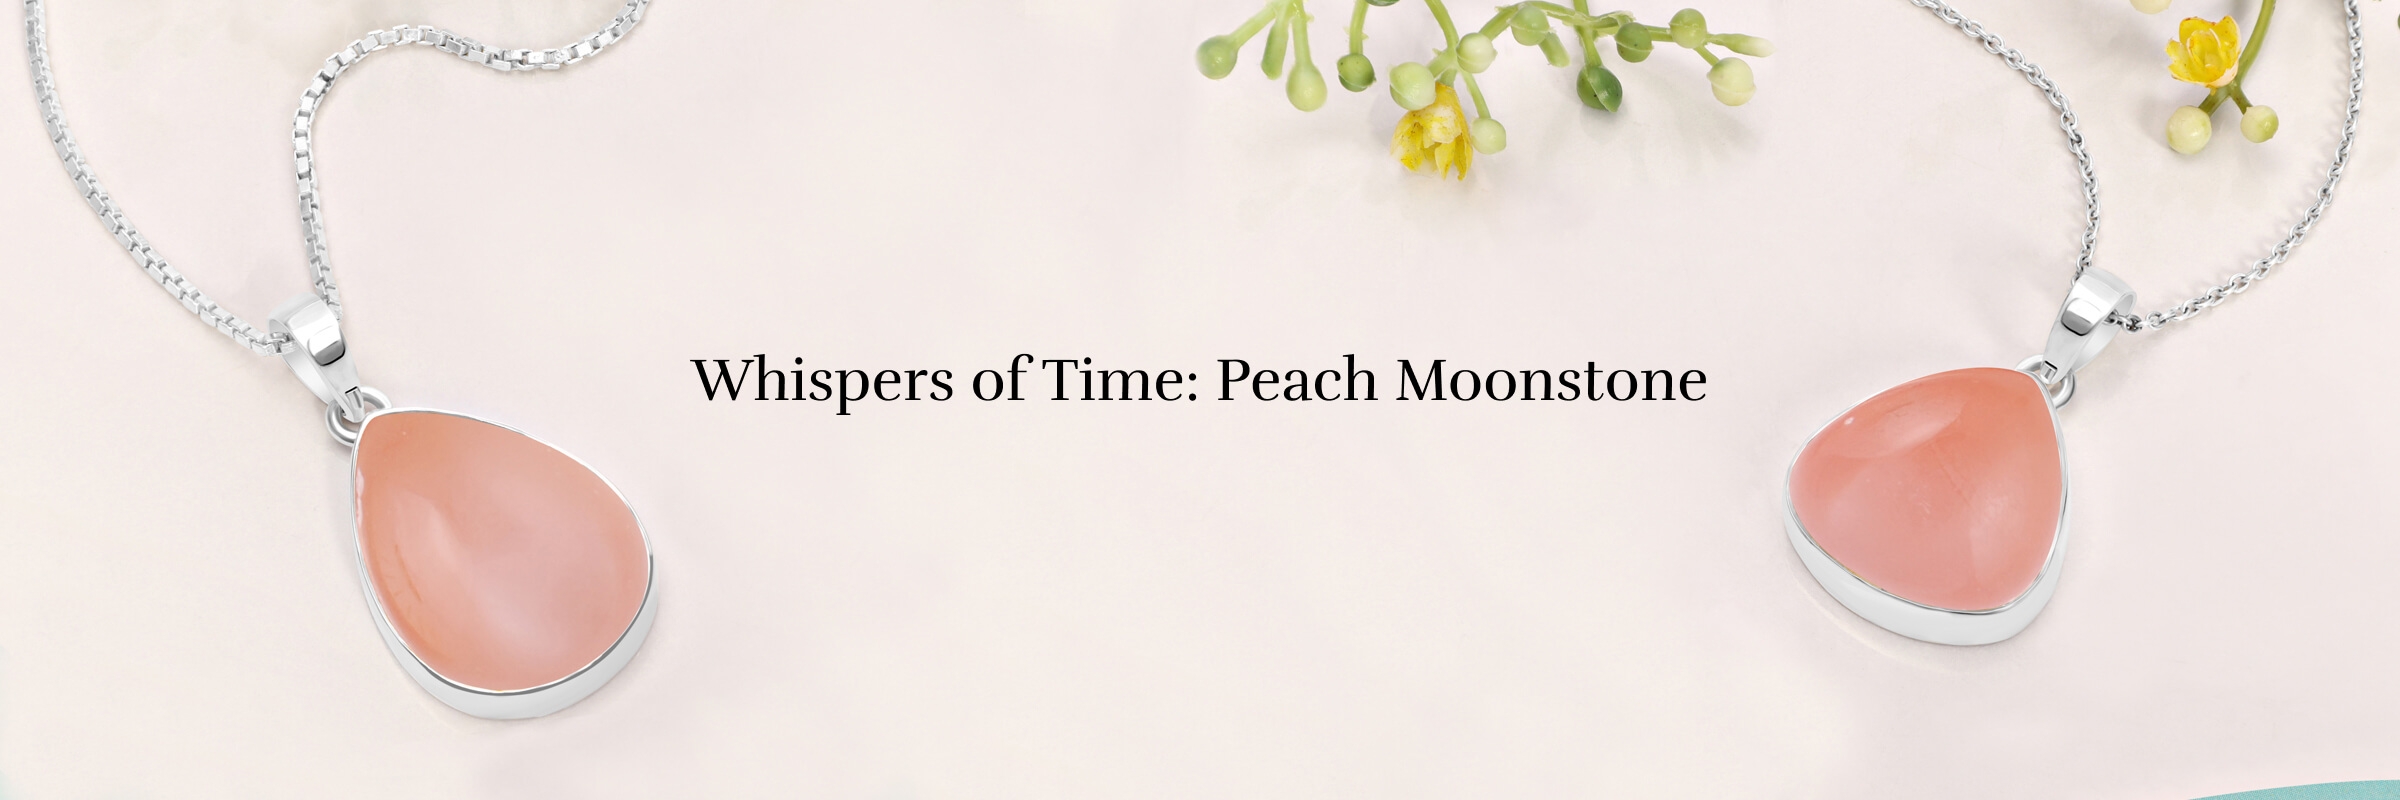 Here are some interesting facts about peach moonstone history: